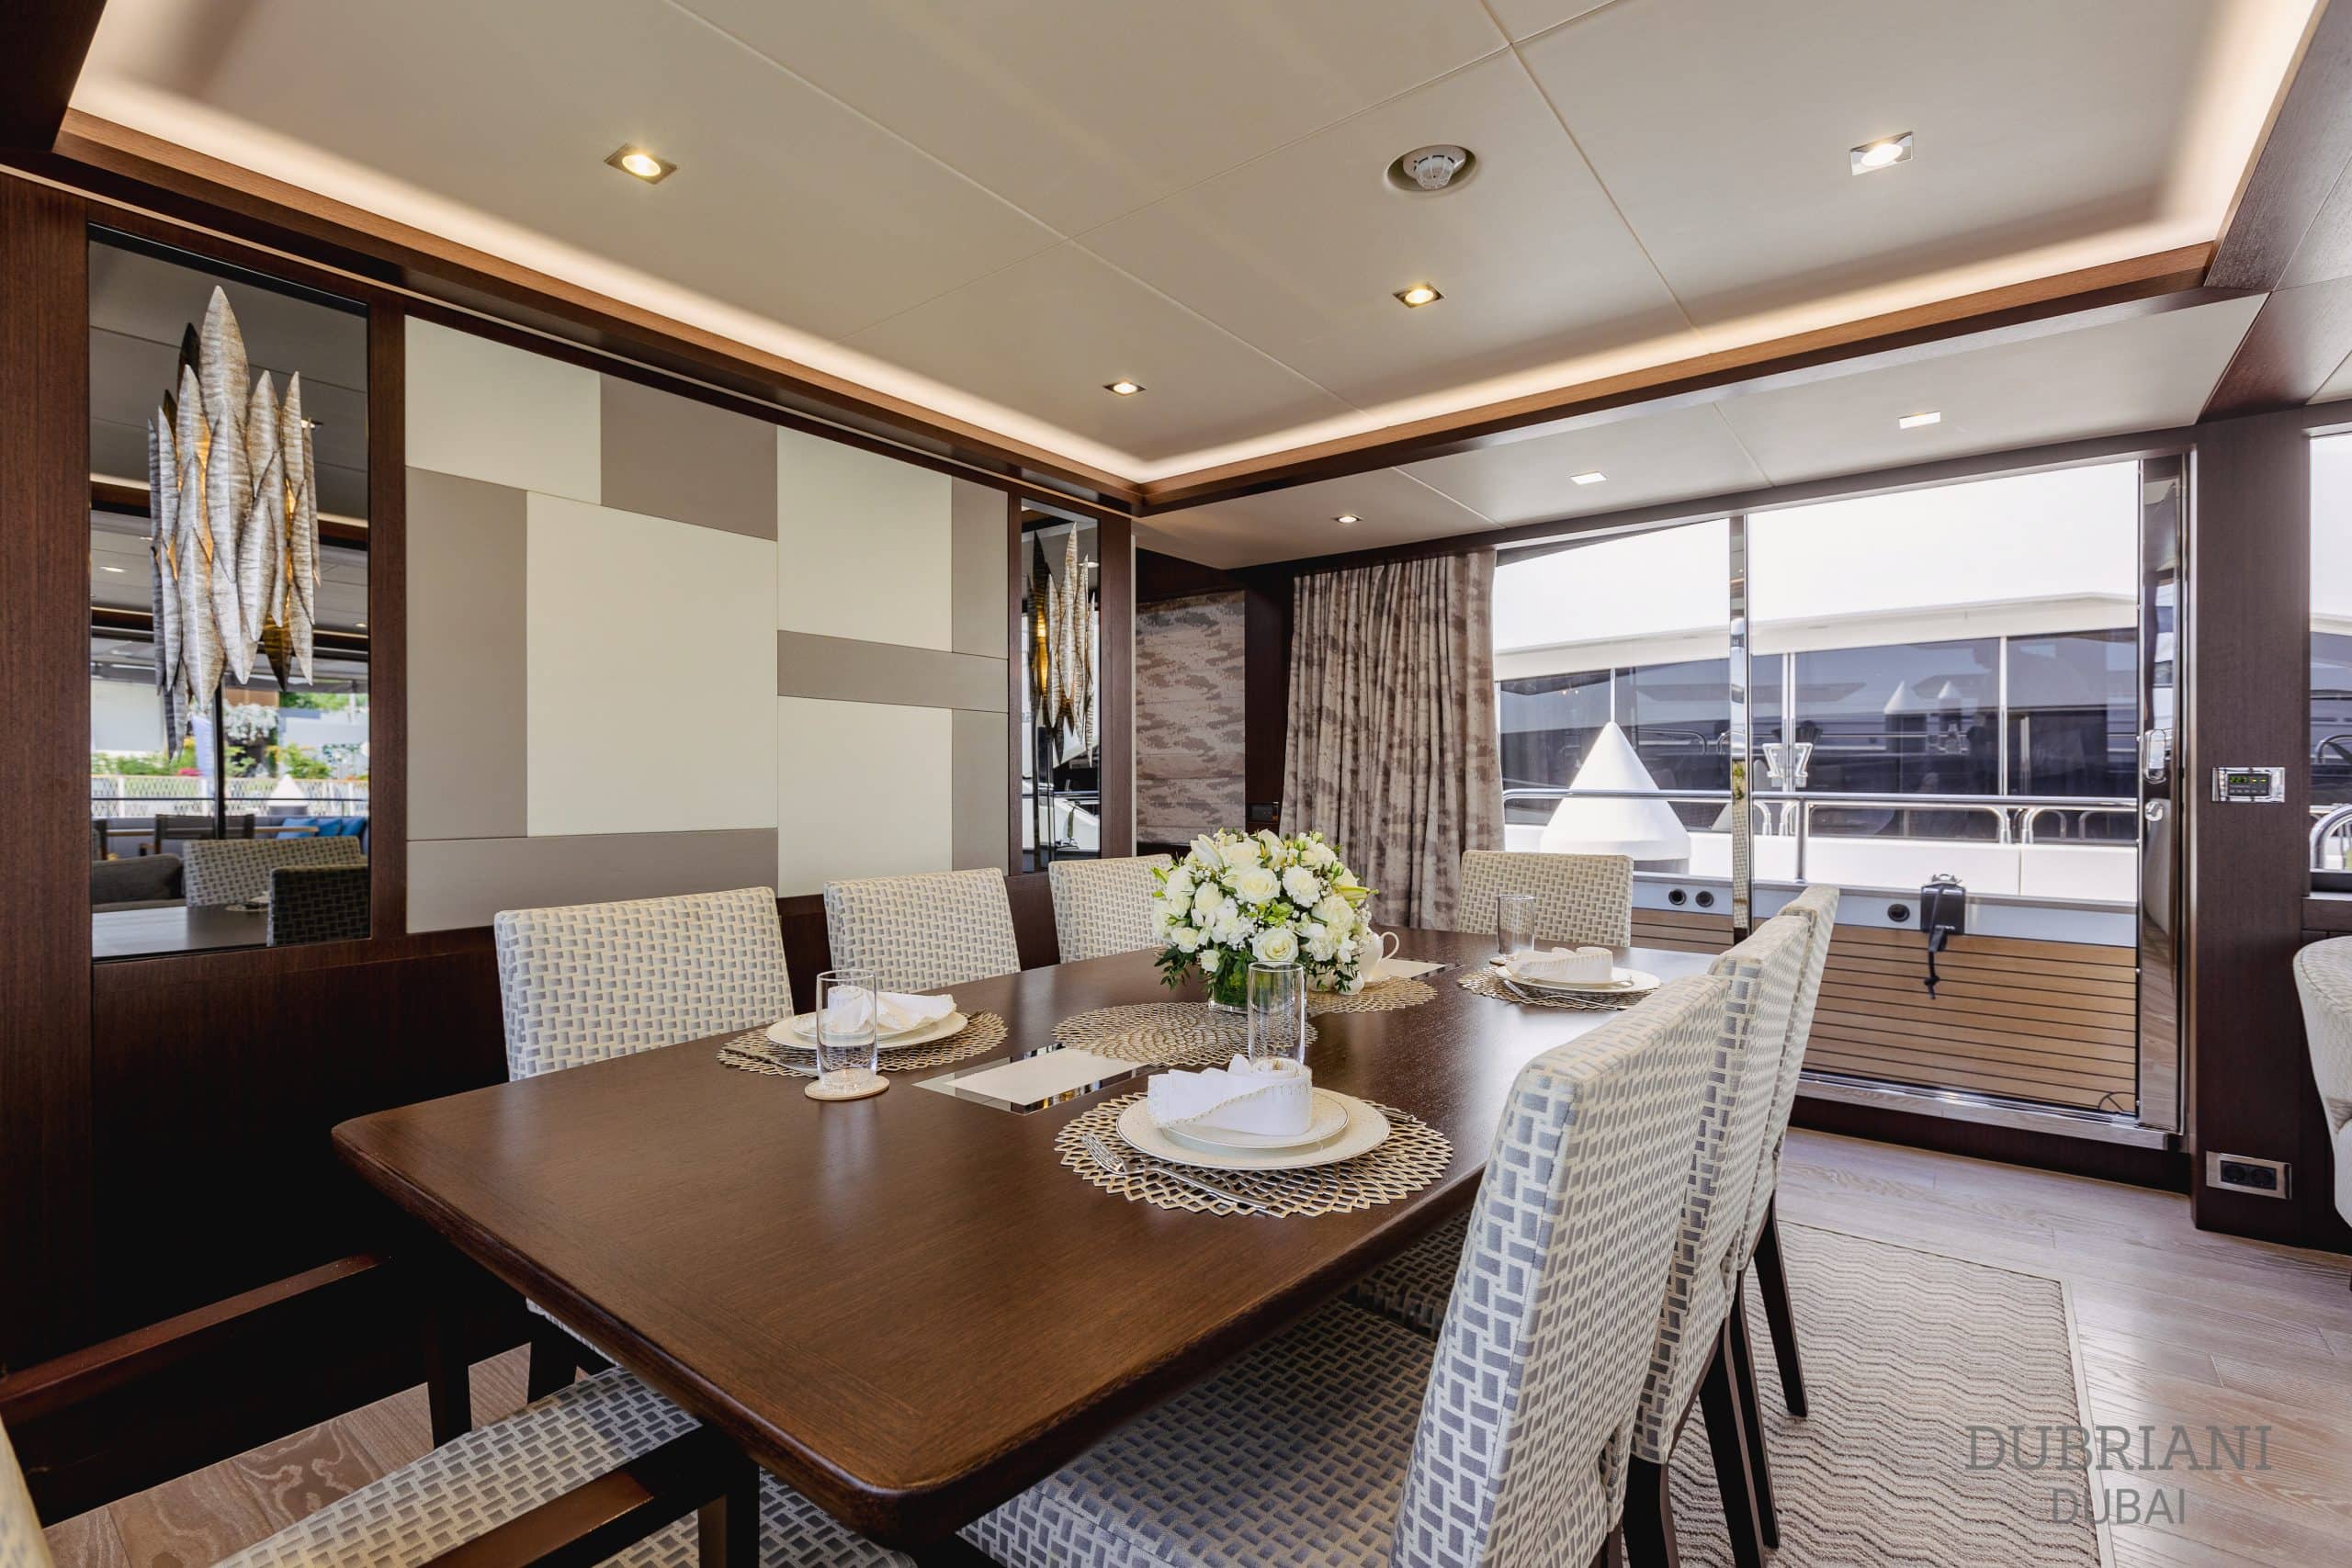 Exquisite Dining Experience on the Sunseeker 95